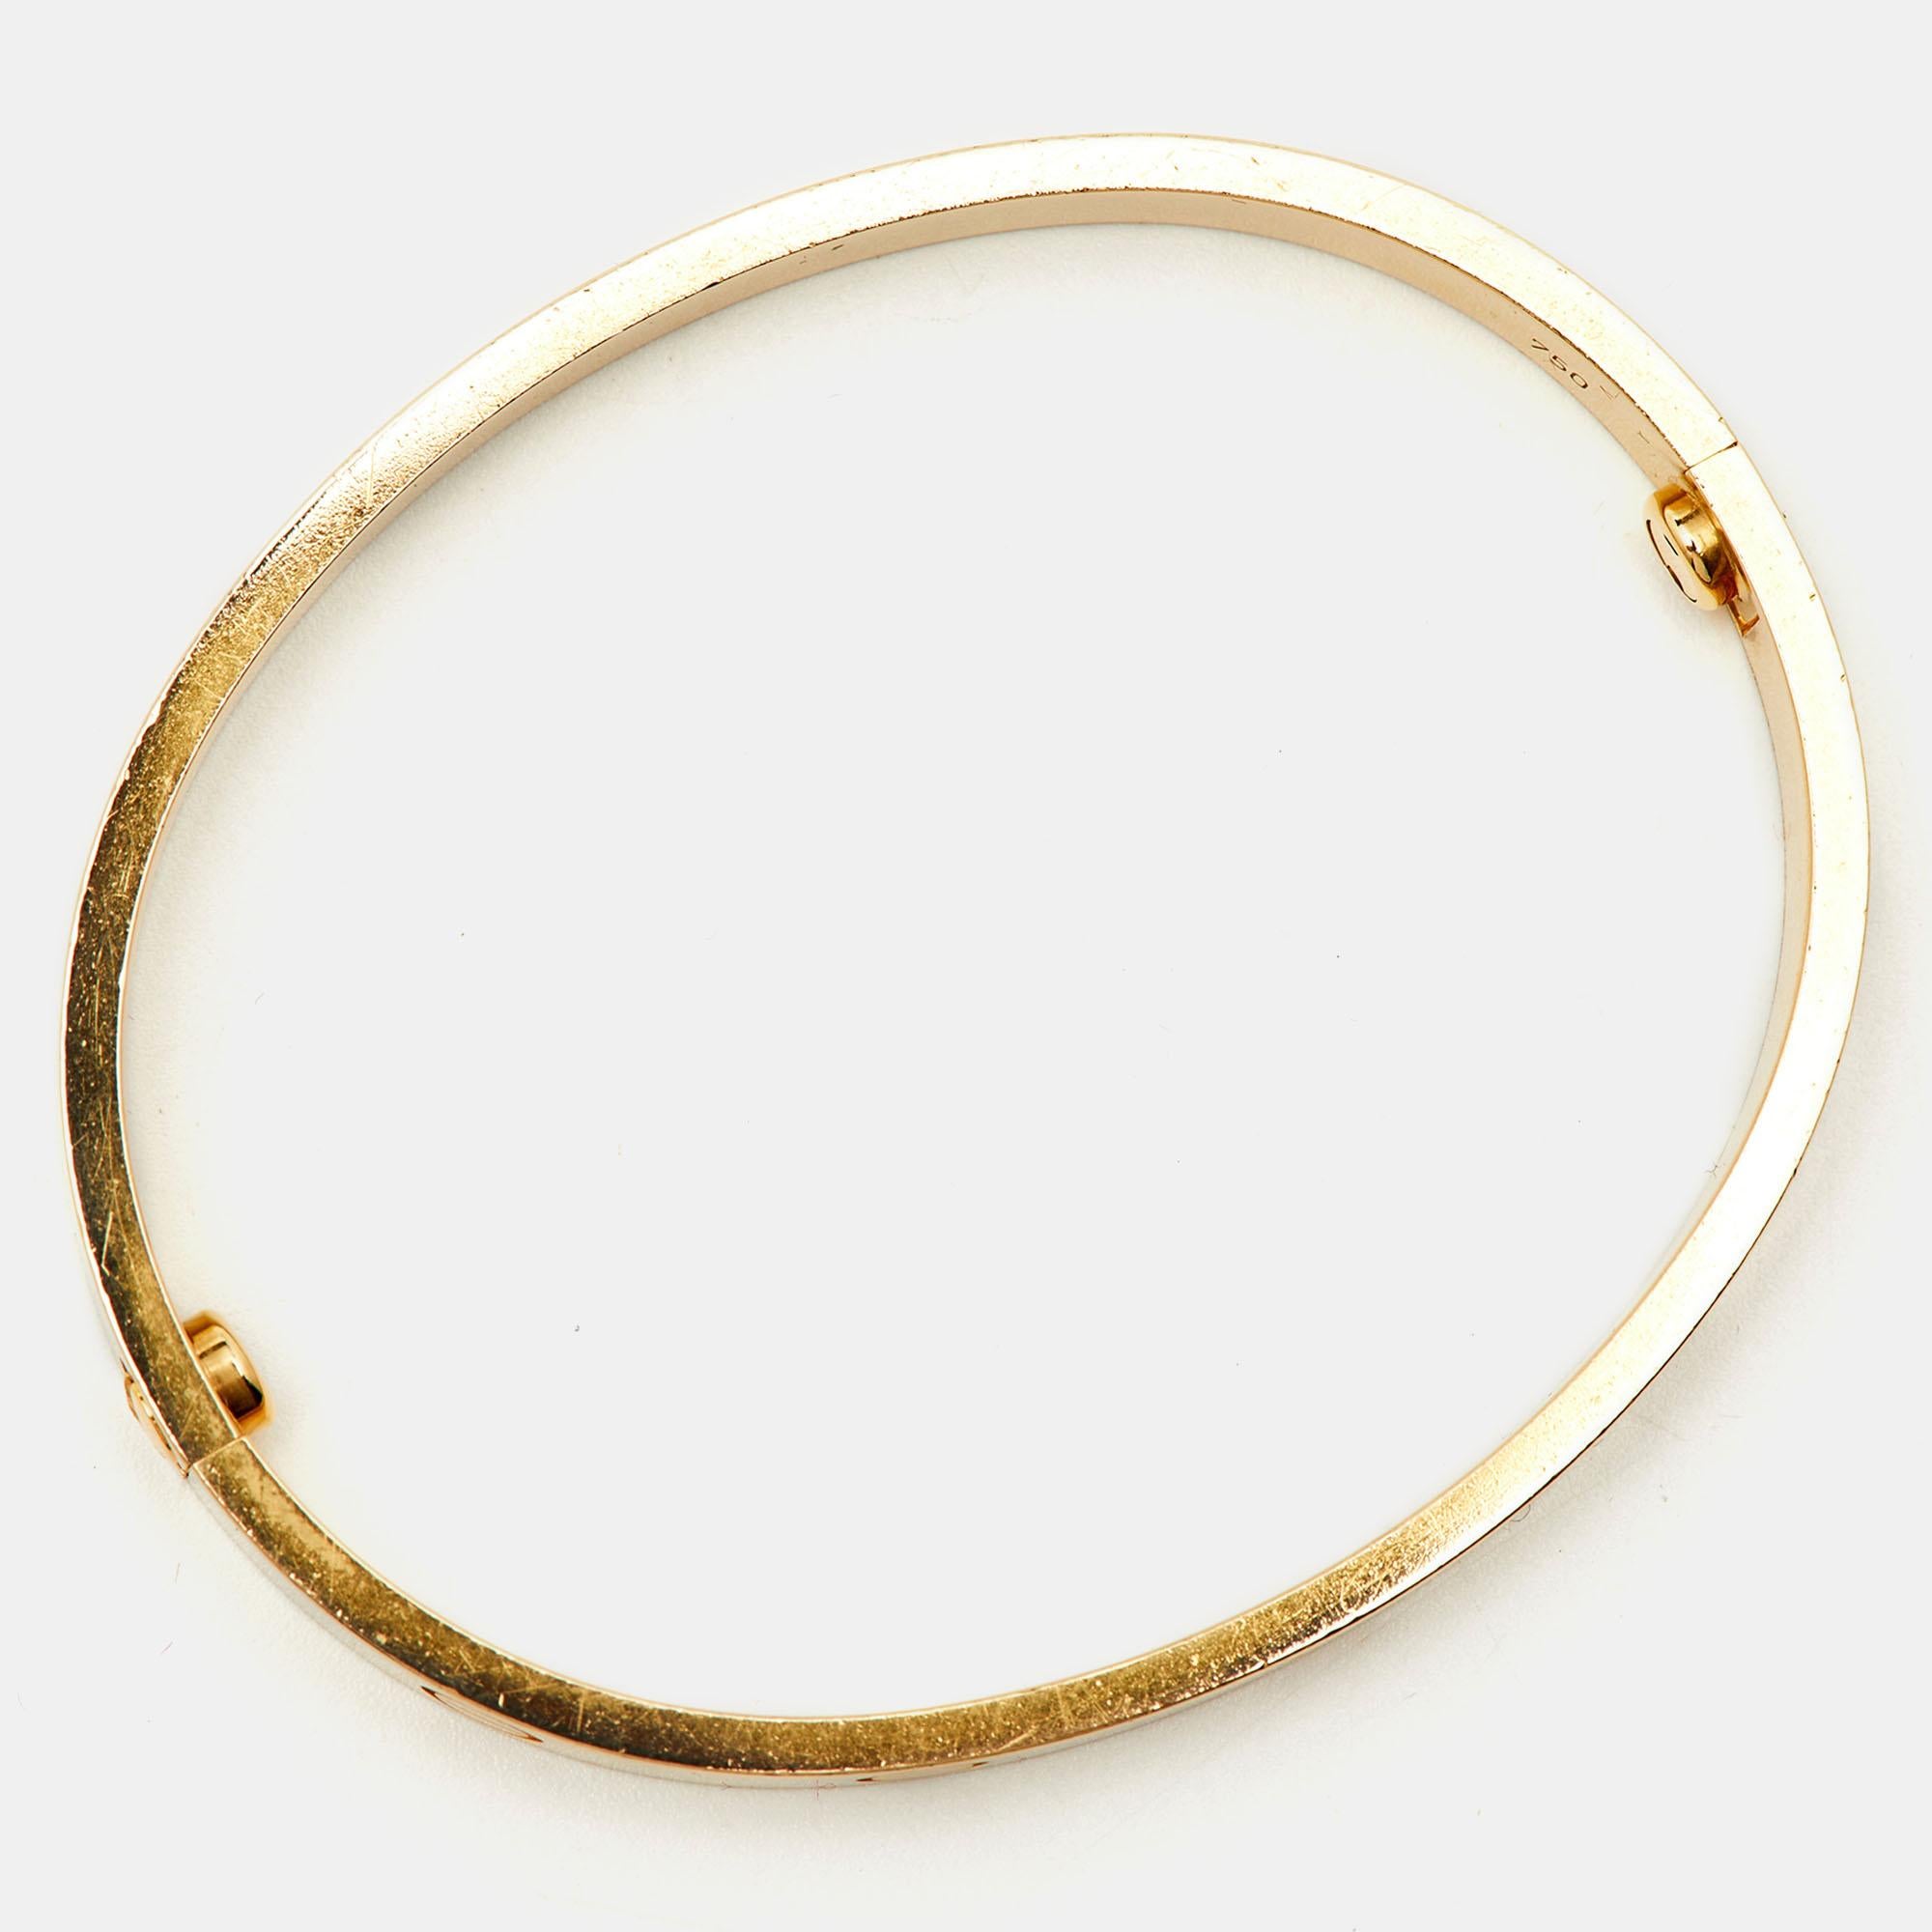 We fell in love with this Cartier Love bracelet at first glance. Look at its gorgeous yet subtle accents and picture how it will beautifully sit on your wrist and charm your peers. The creation is crafted from 18k yellow gold and neatly detailed